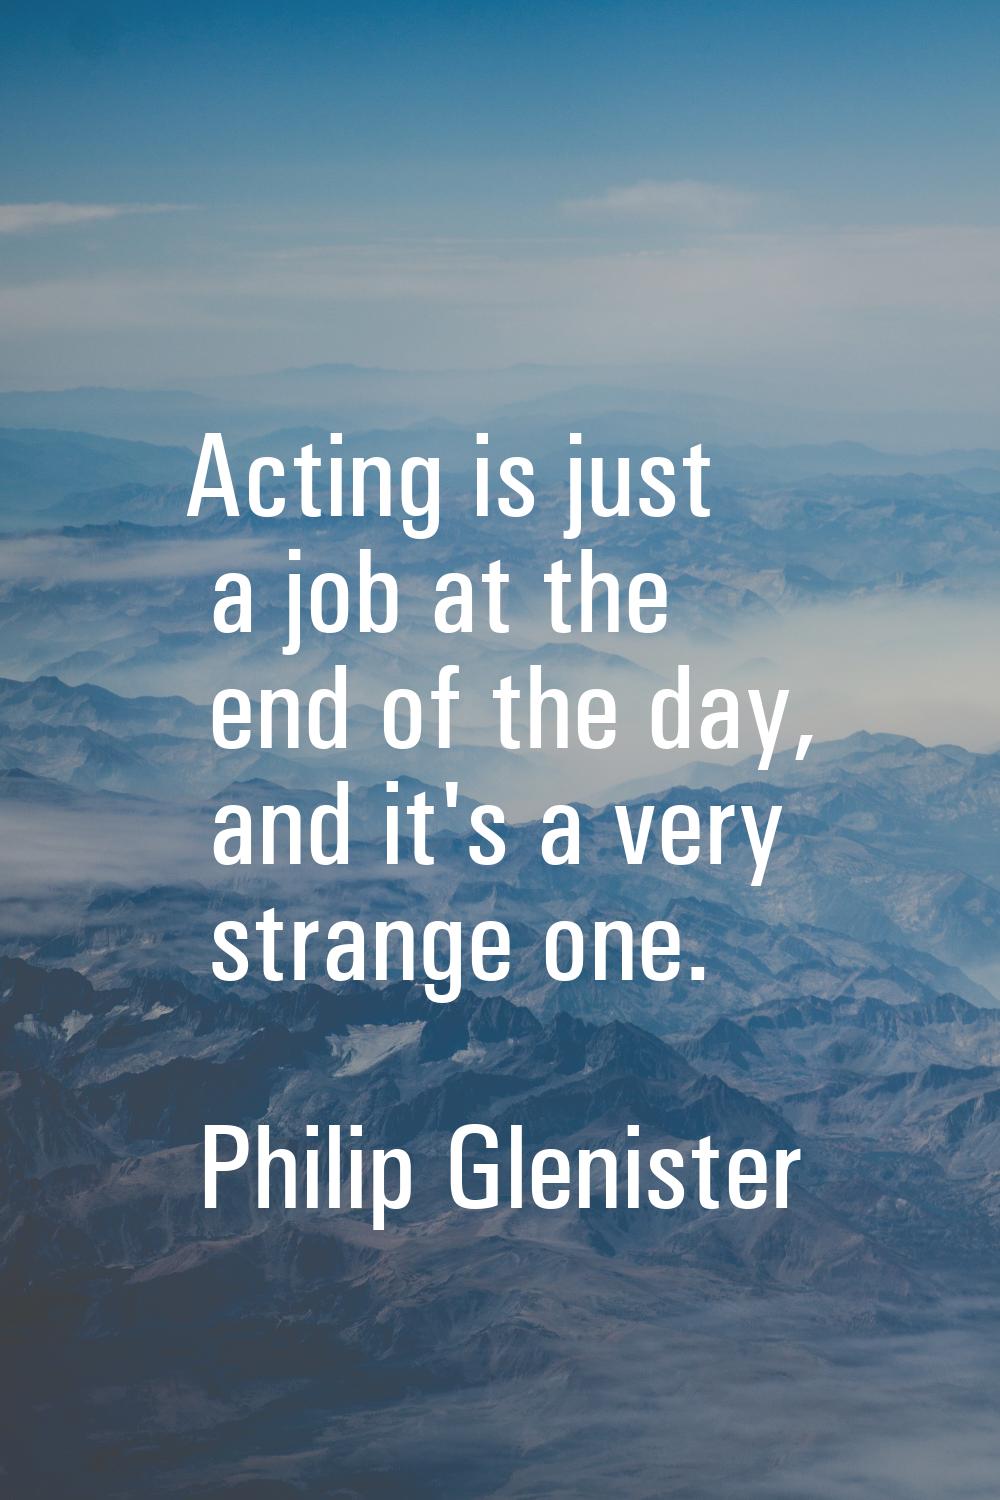 Acting is just a job at the end of the day, and it's a very strange one.